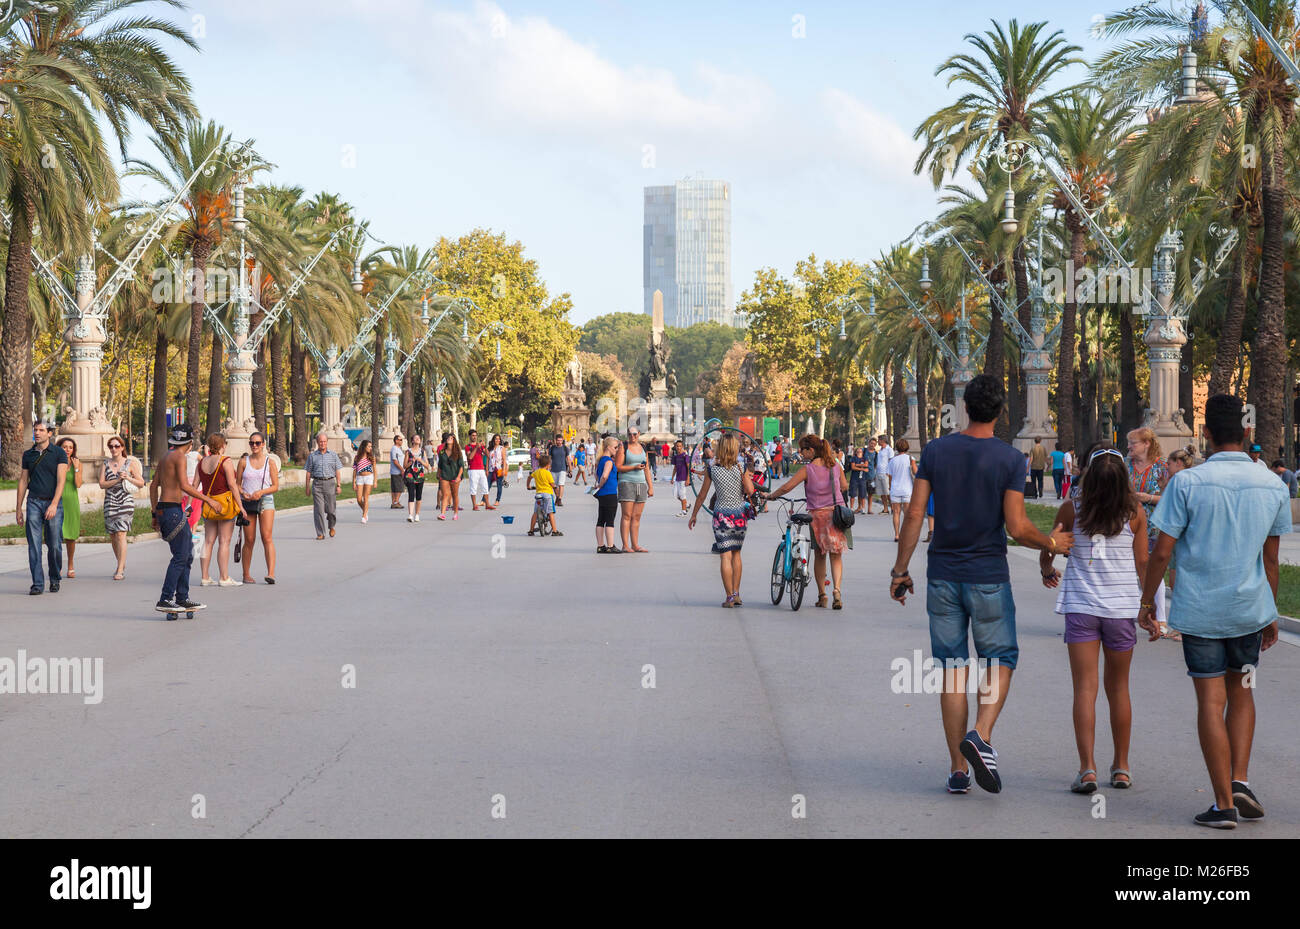 Barcelona, Spain - August 26, 2014: Passeig de Lluis Companys. People walk on promenade in the Ciutat Vella and Eixample districts of Barcelona, Spain Stock Photo